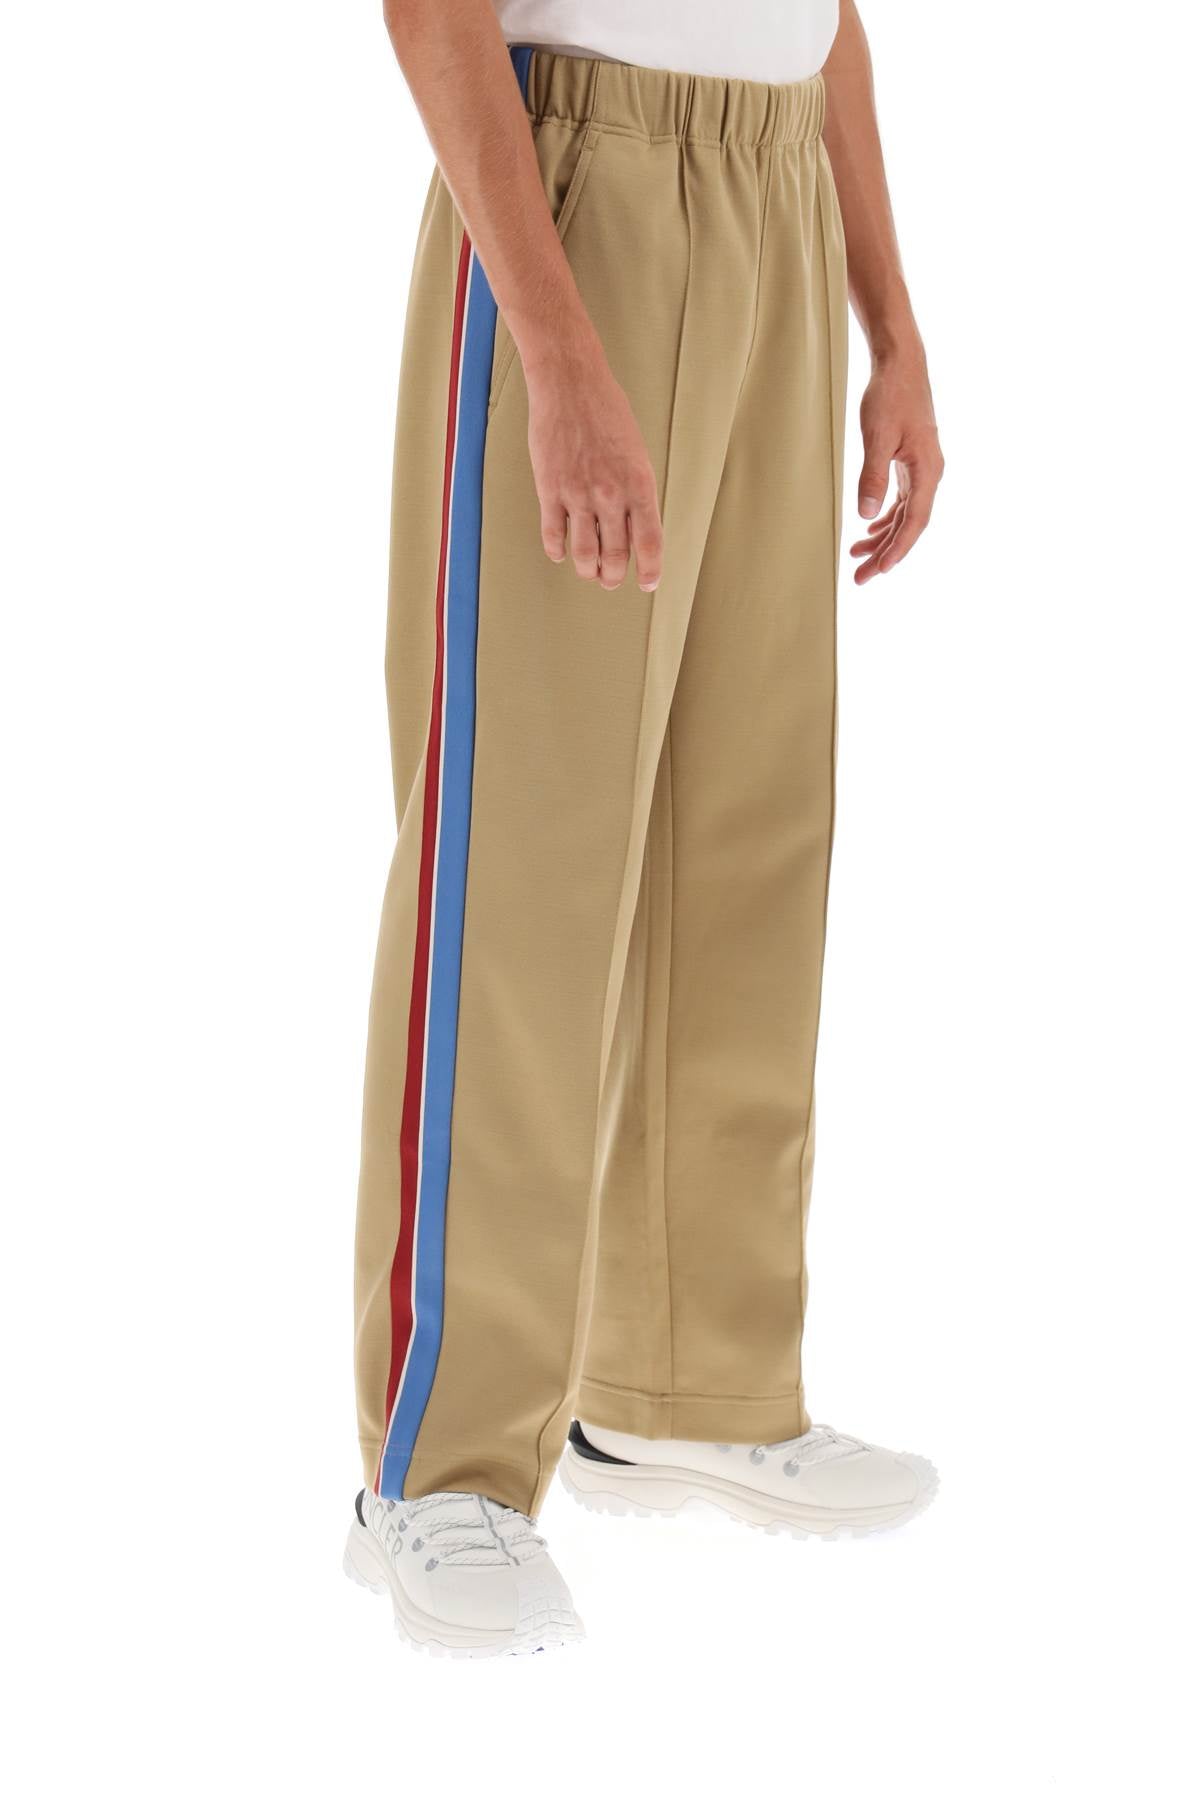 Moncler grenoble jogger pants with side bands